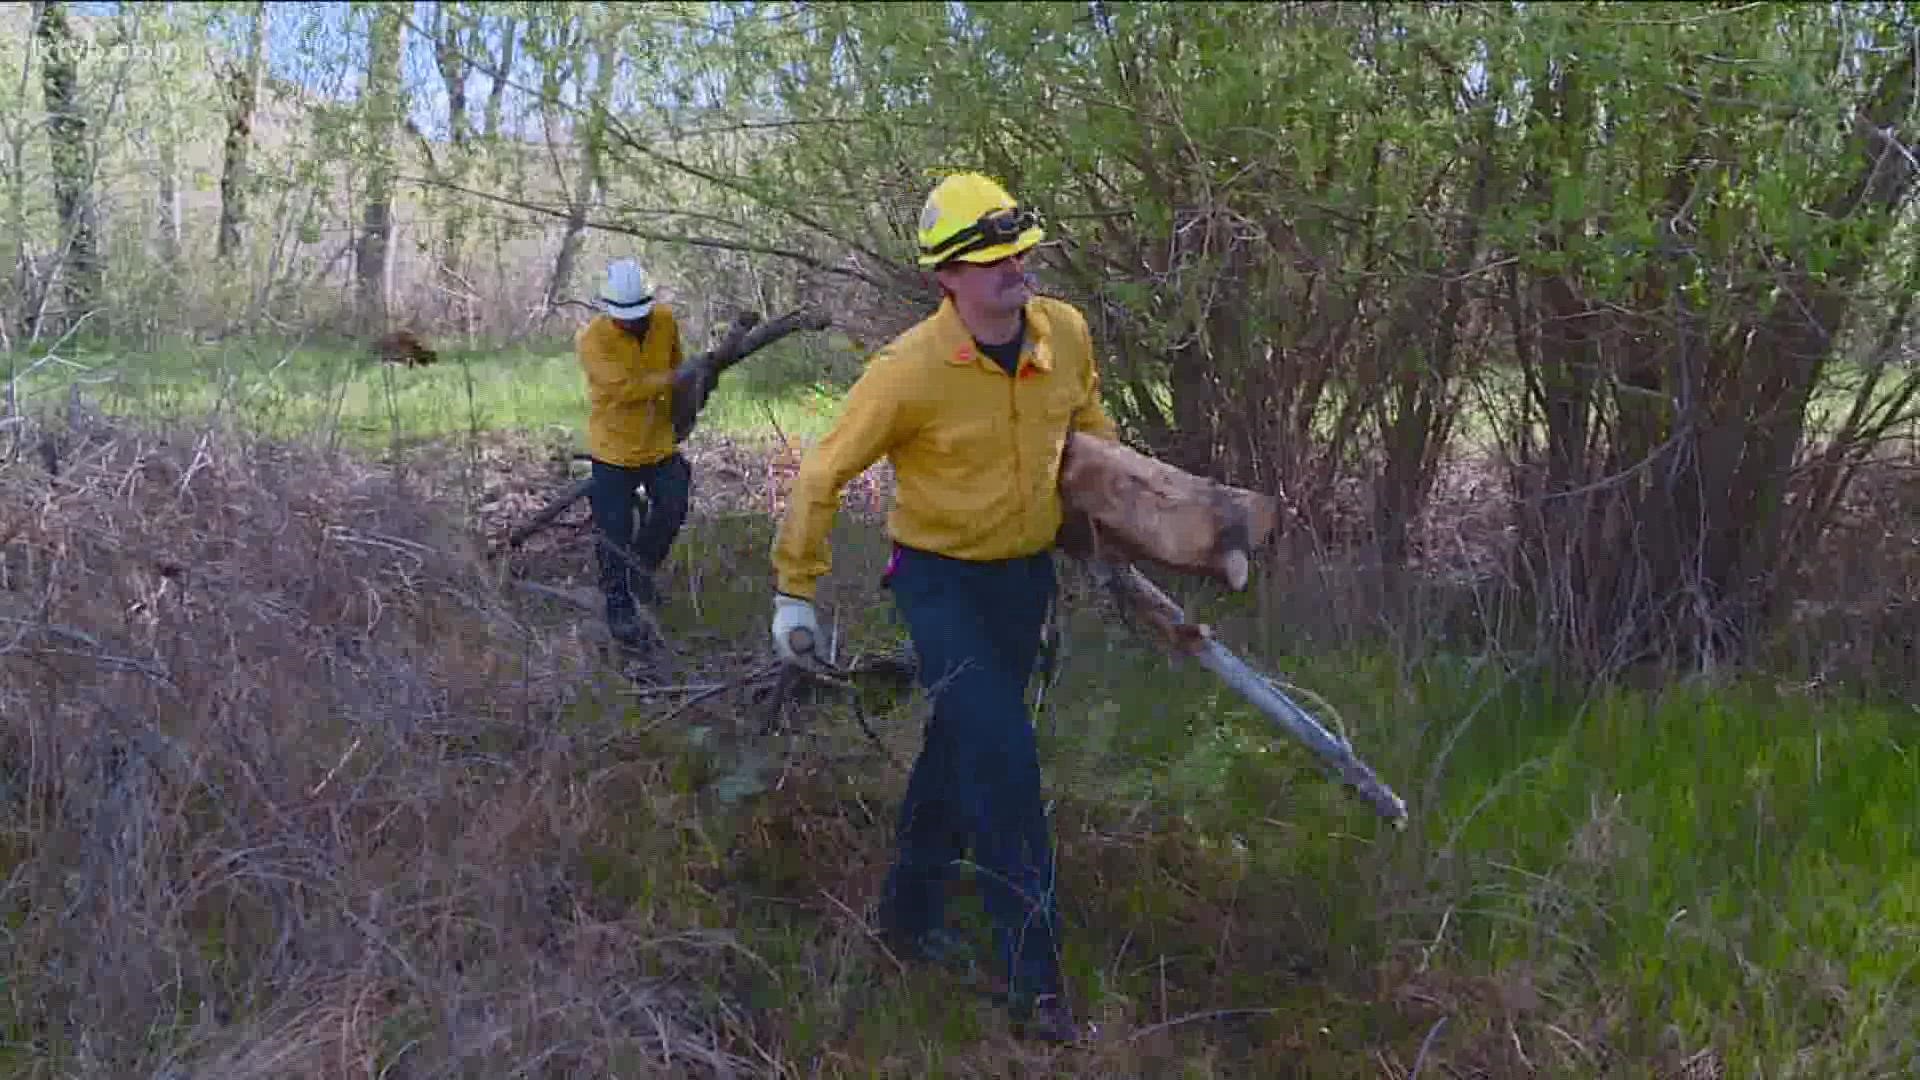 Boise Fire Department worked alongside Boise Parks and Recreation and the Audubon Society to remove the invasive Russian Olive tree from an east Boise park.